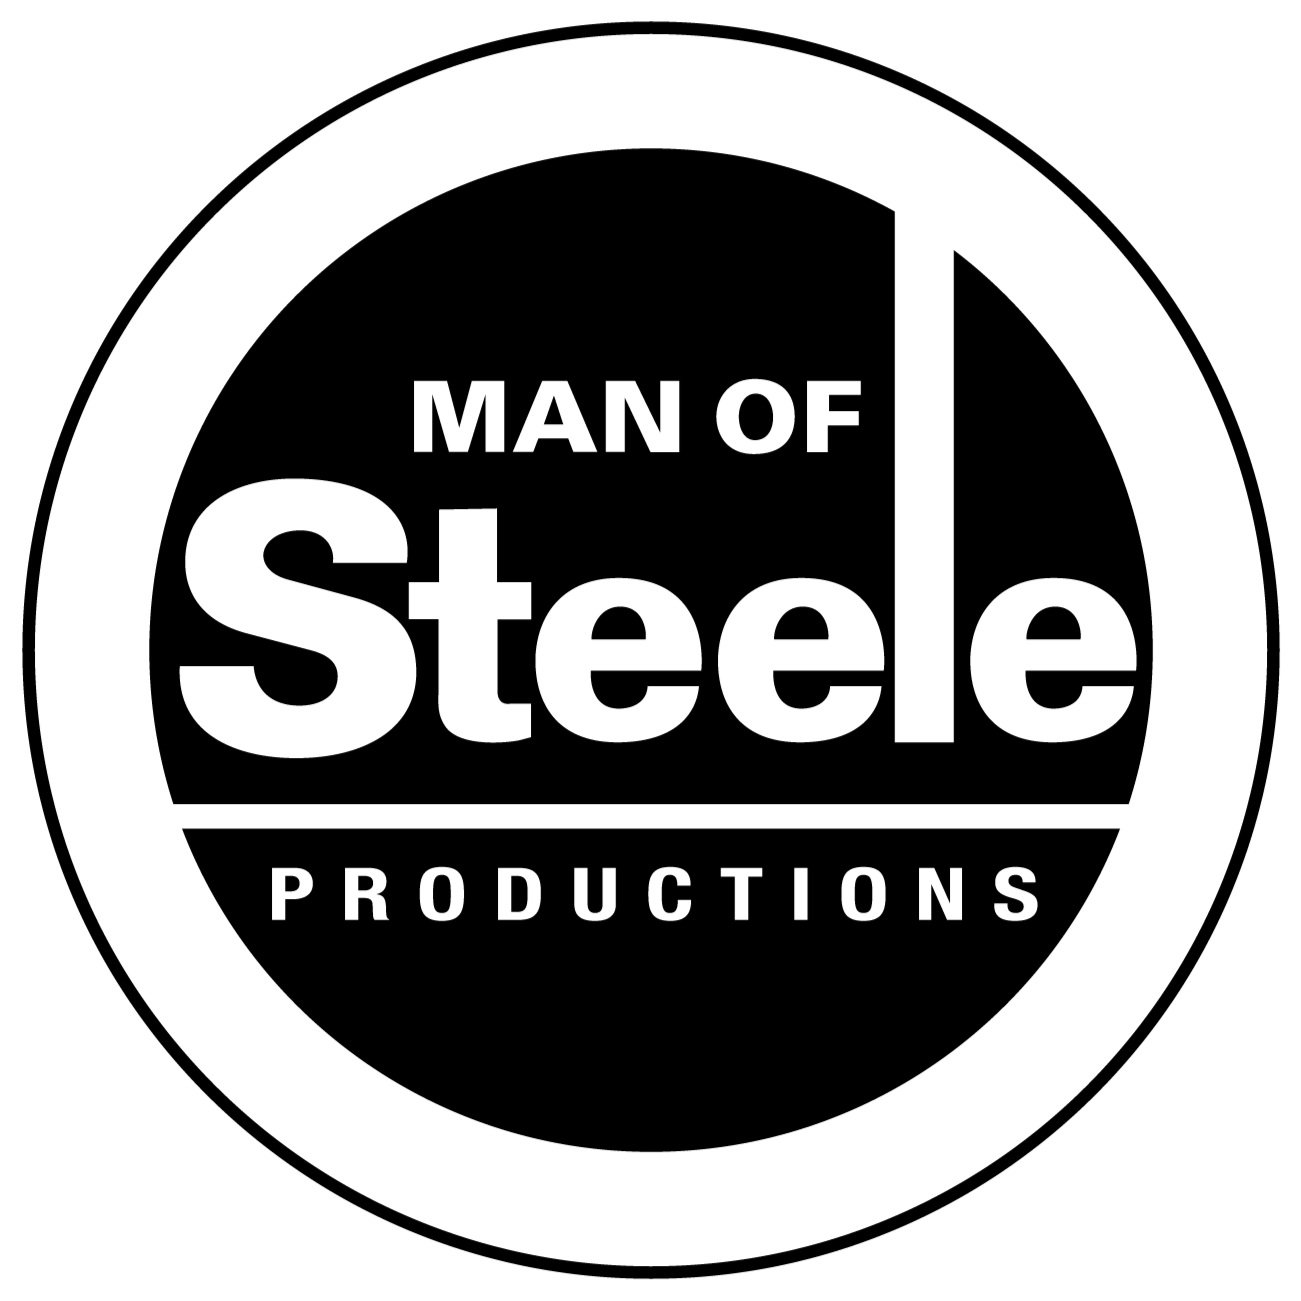 Man of Steele Productions